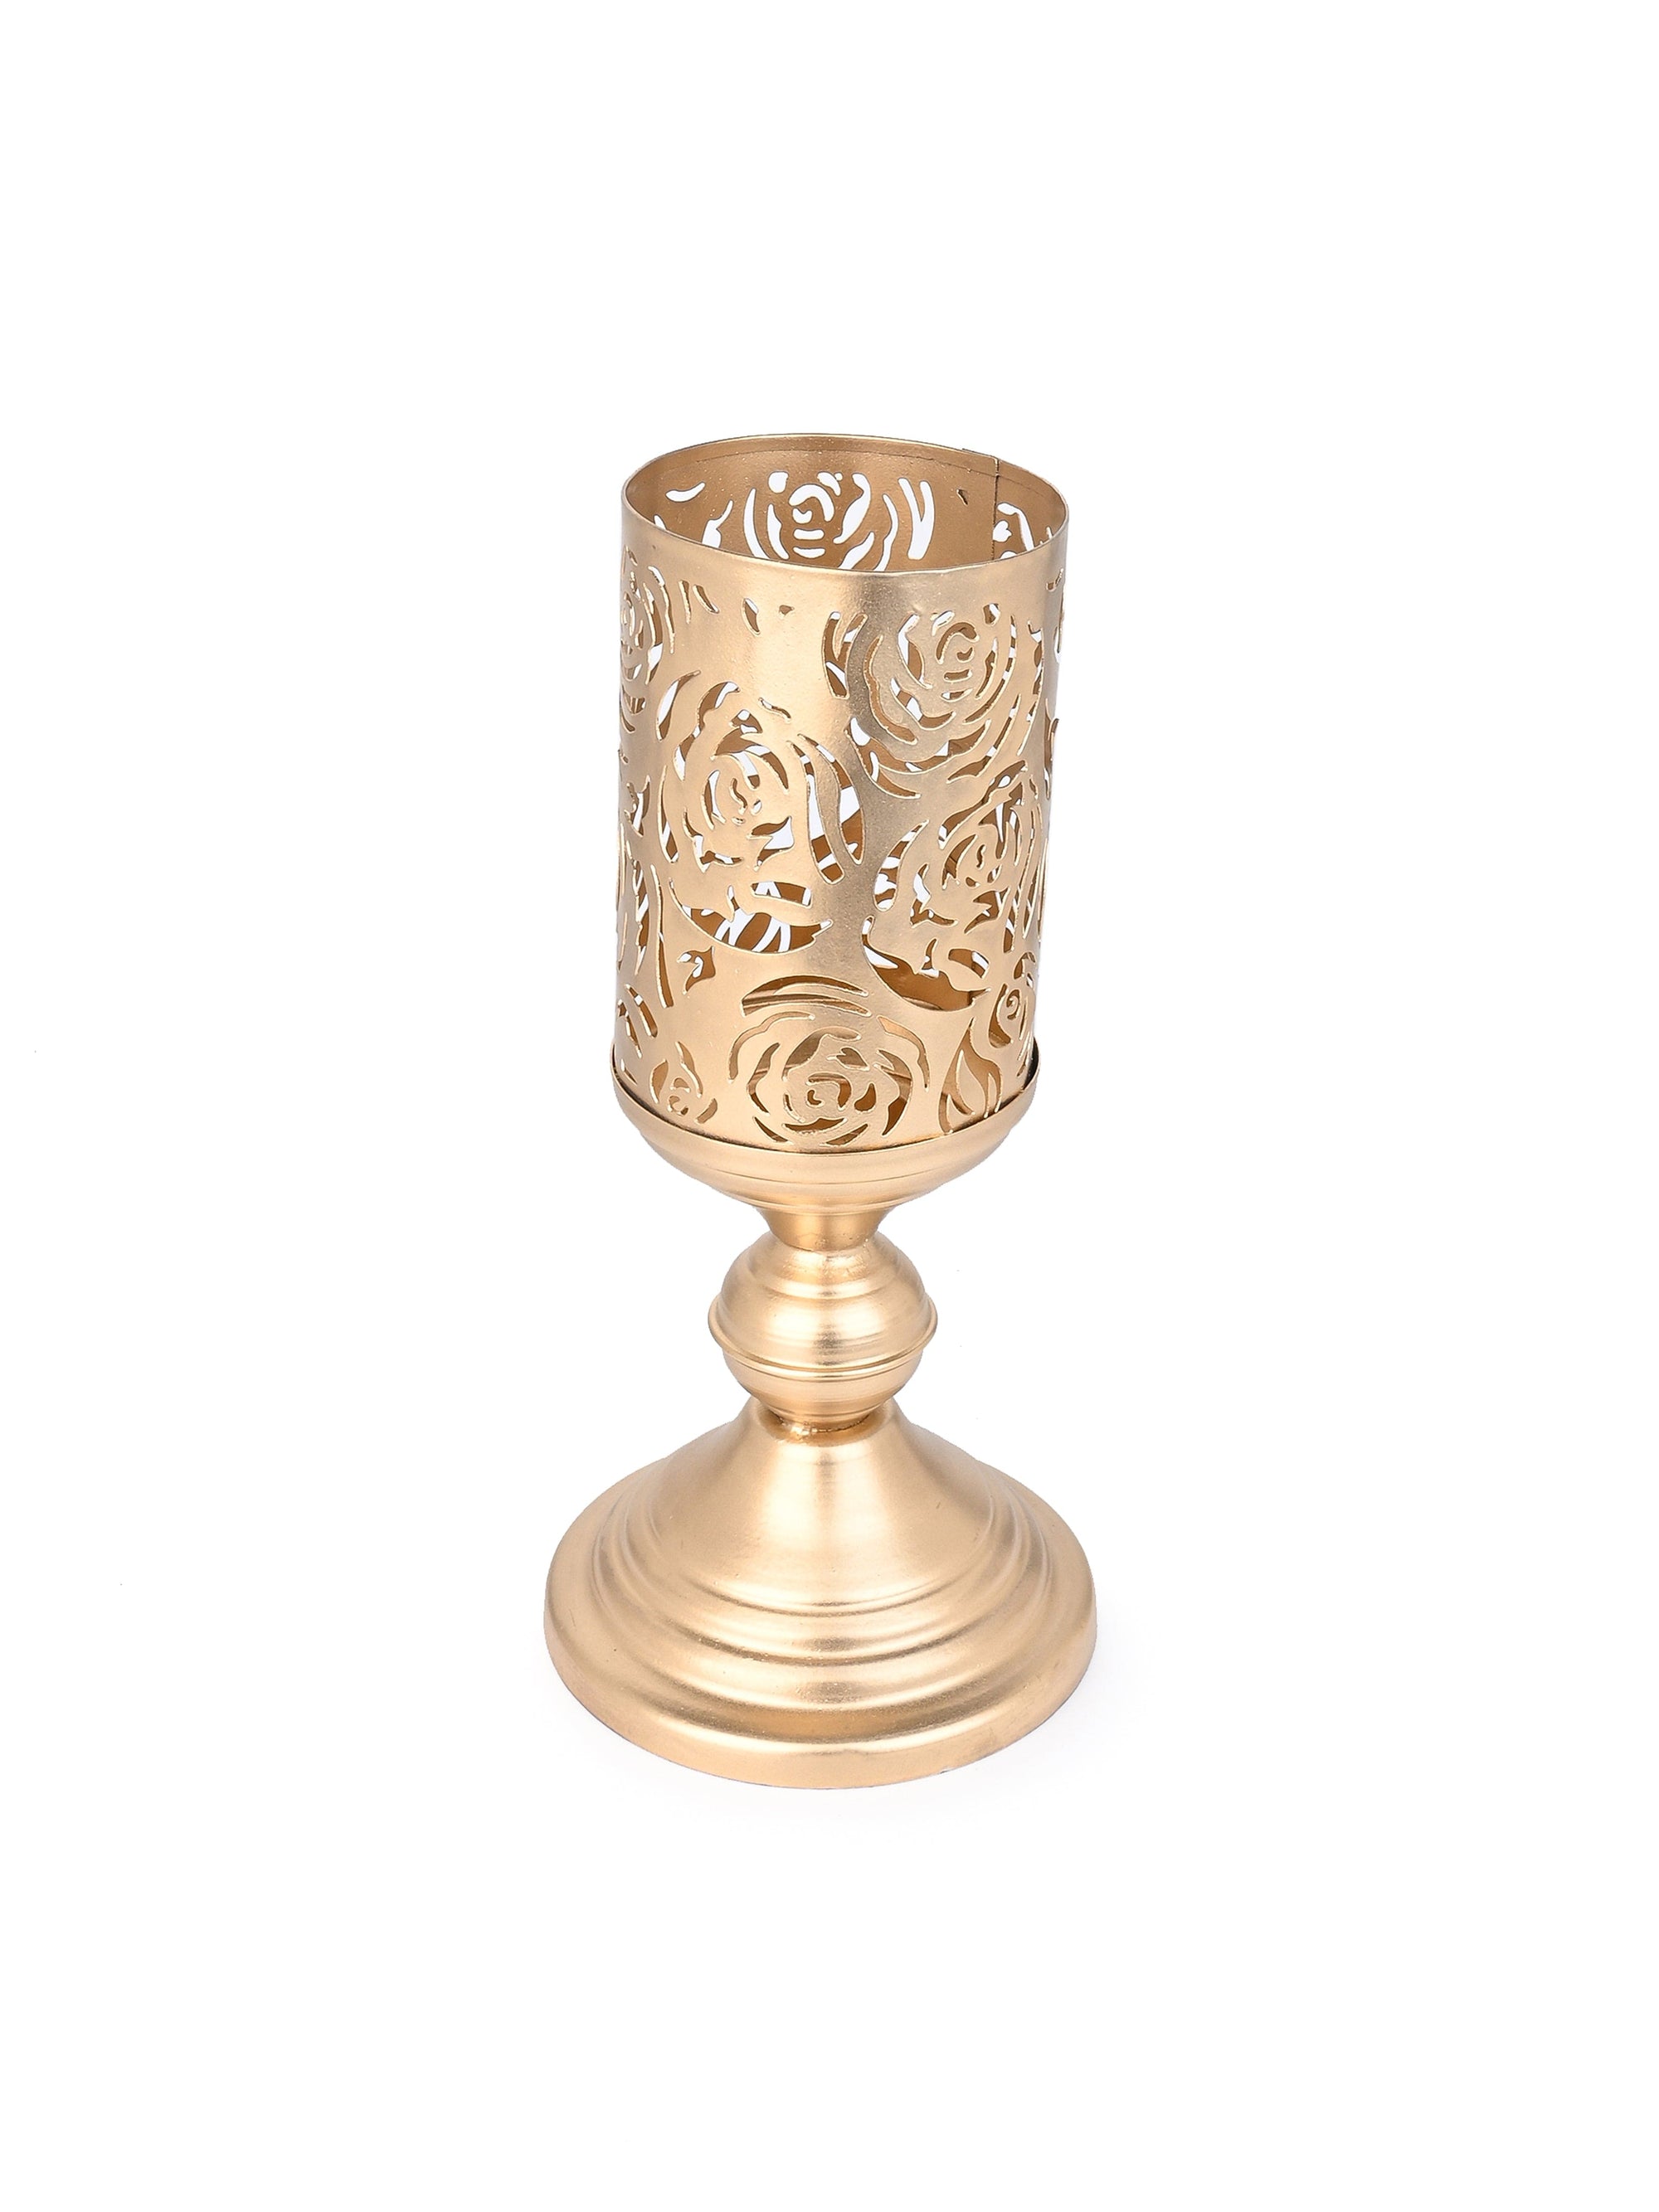 Set of 2 Cylindrical Metal Candle Holders with Cutwork design on the Body